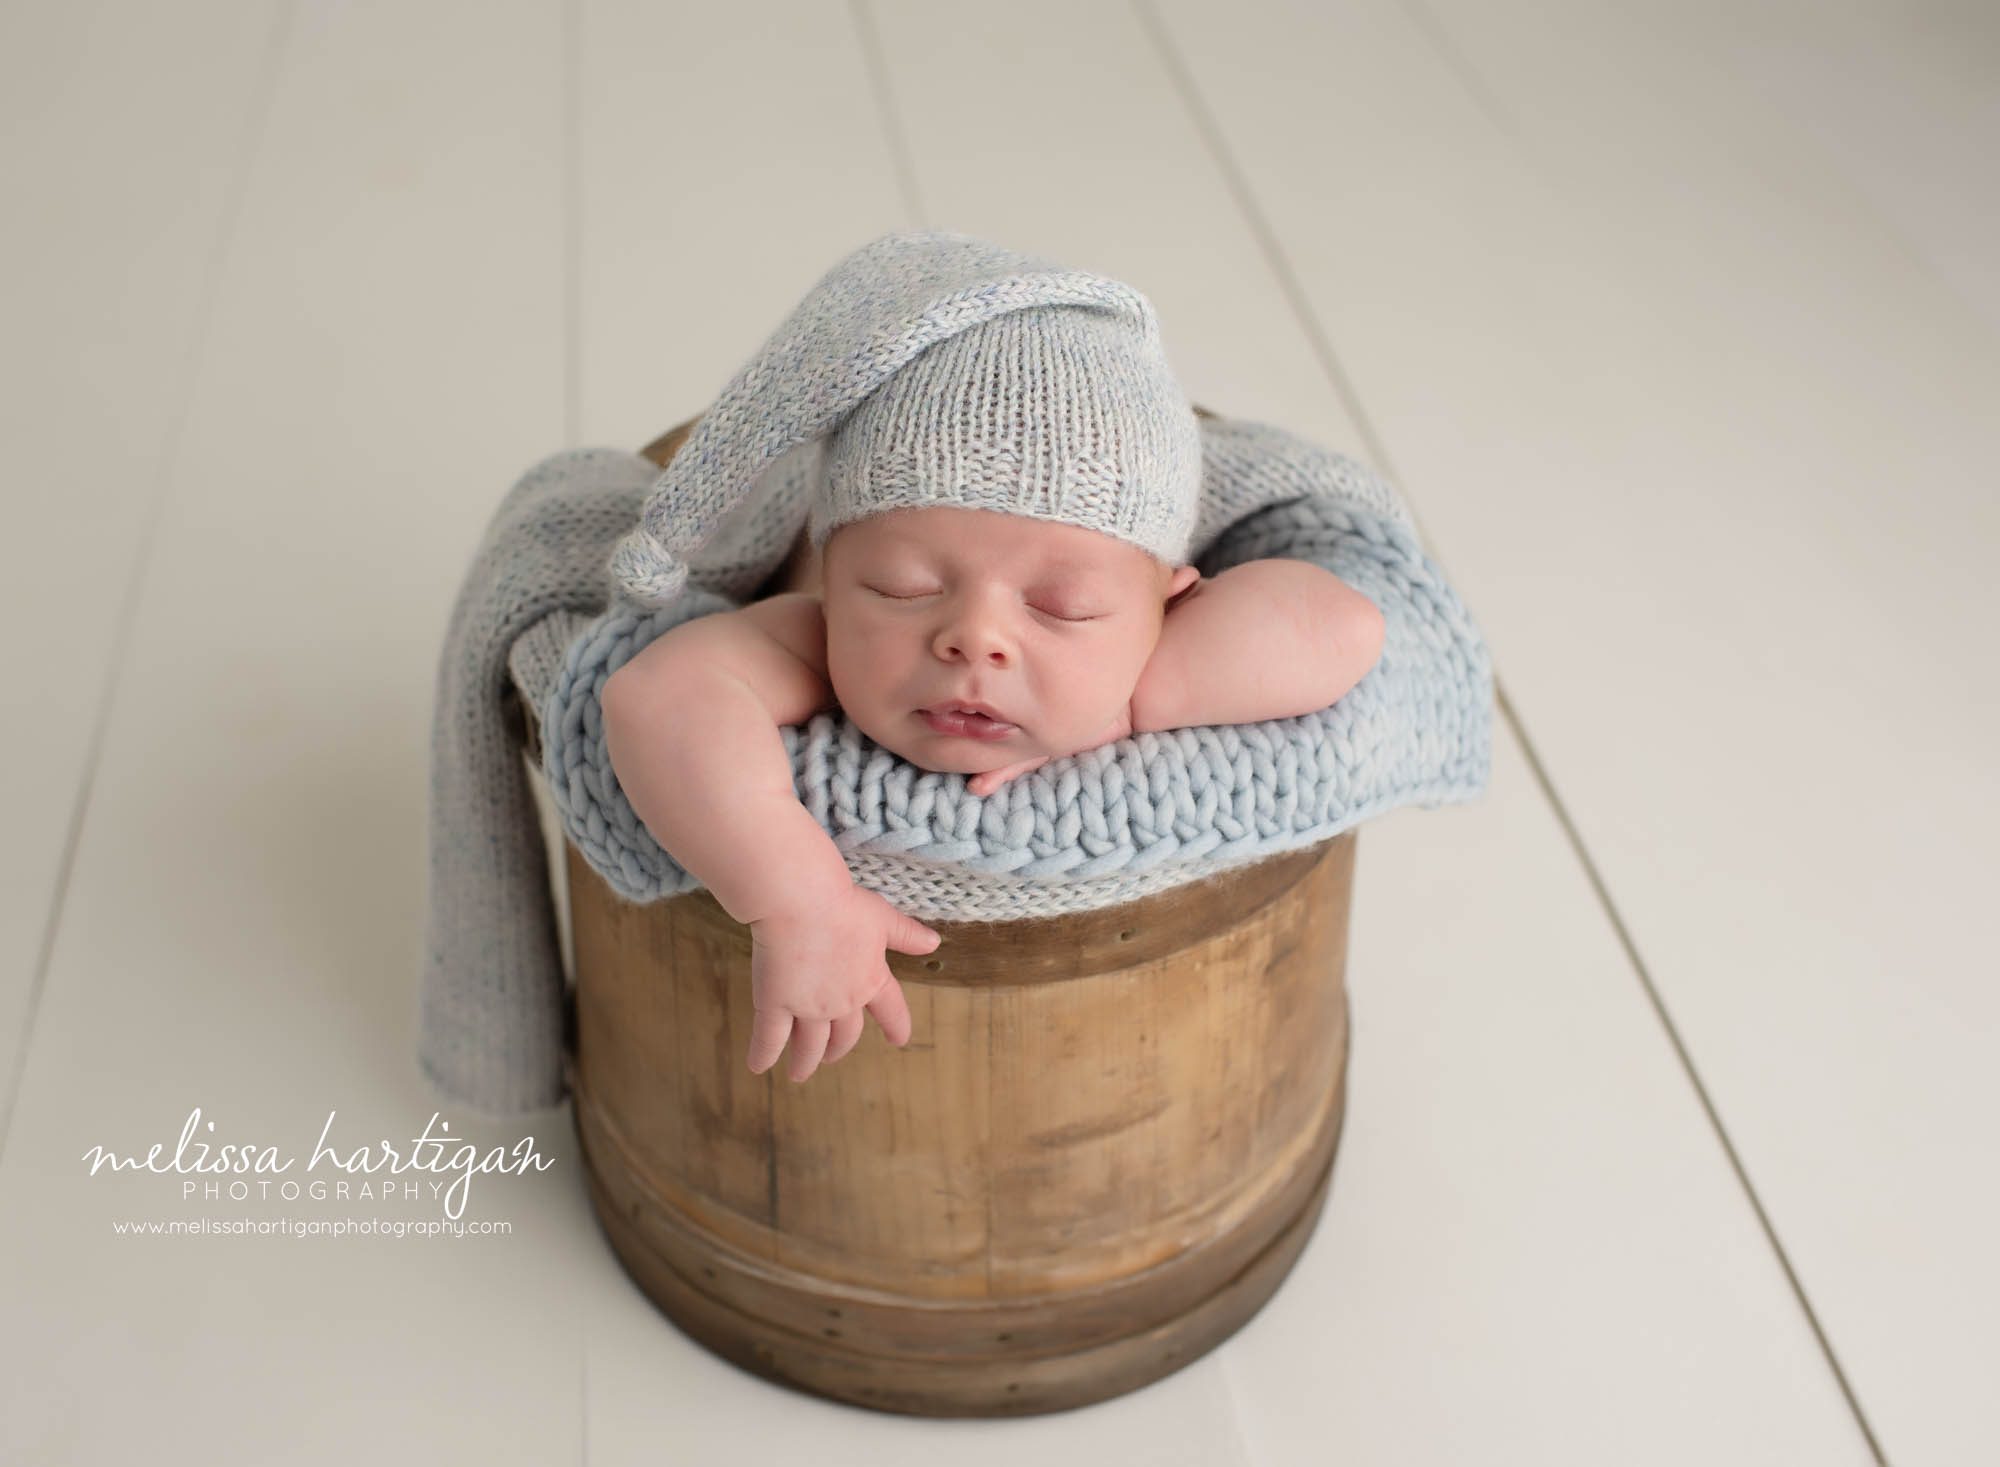 Baby boy posed in wooden prop bucket with blue toned knitted layer blanket and knitted sleepy cap